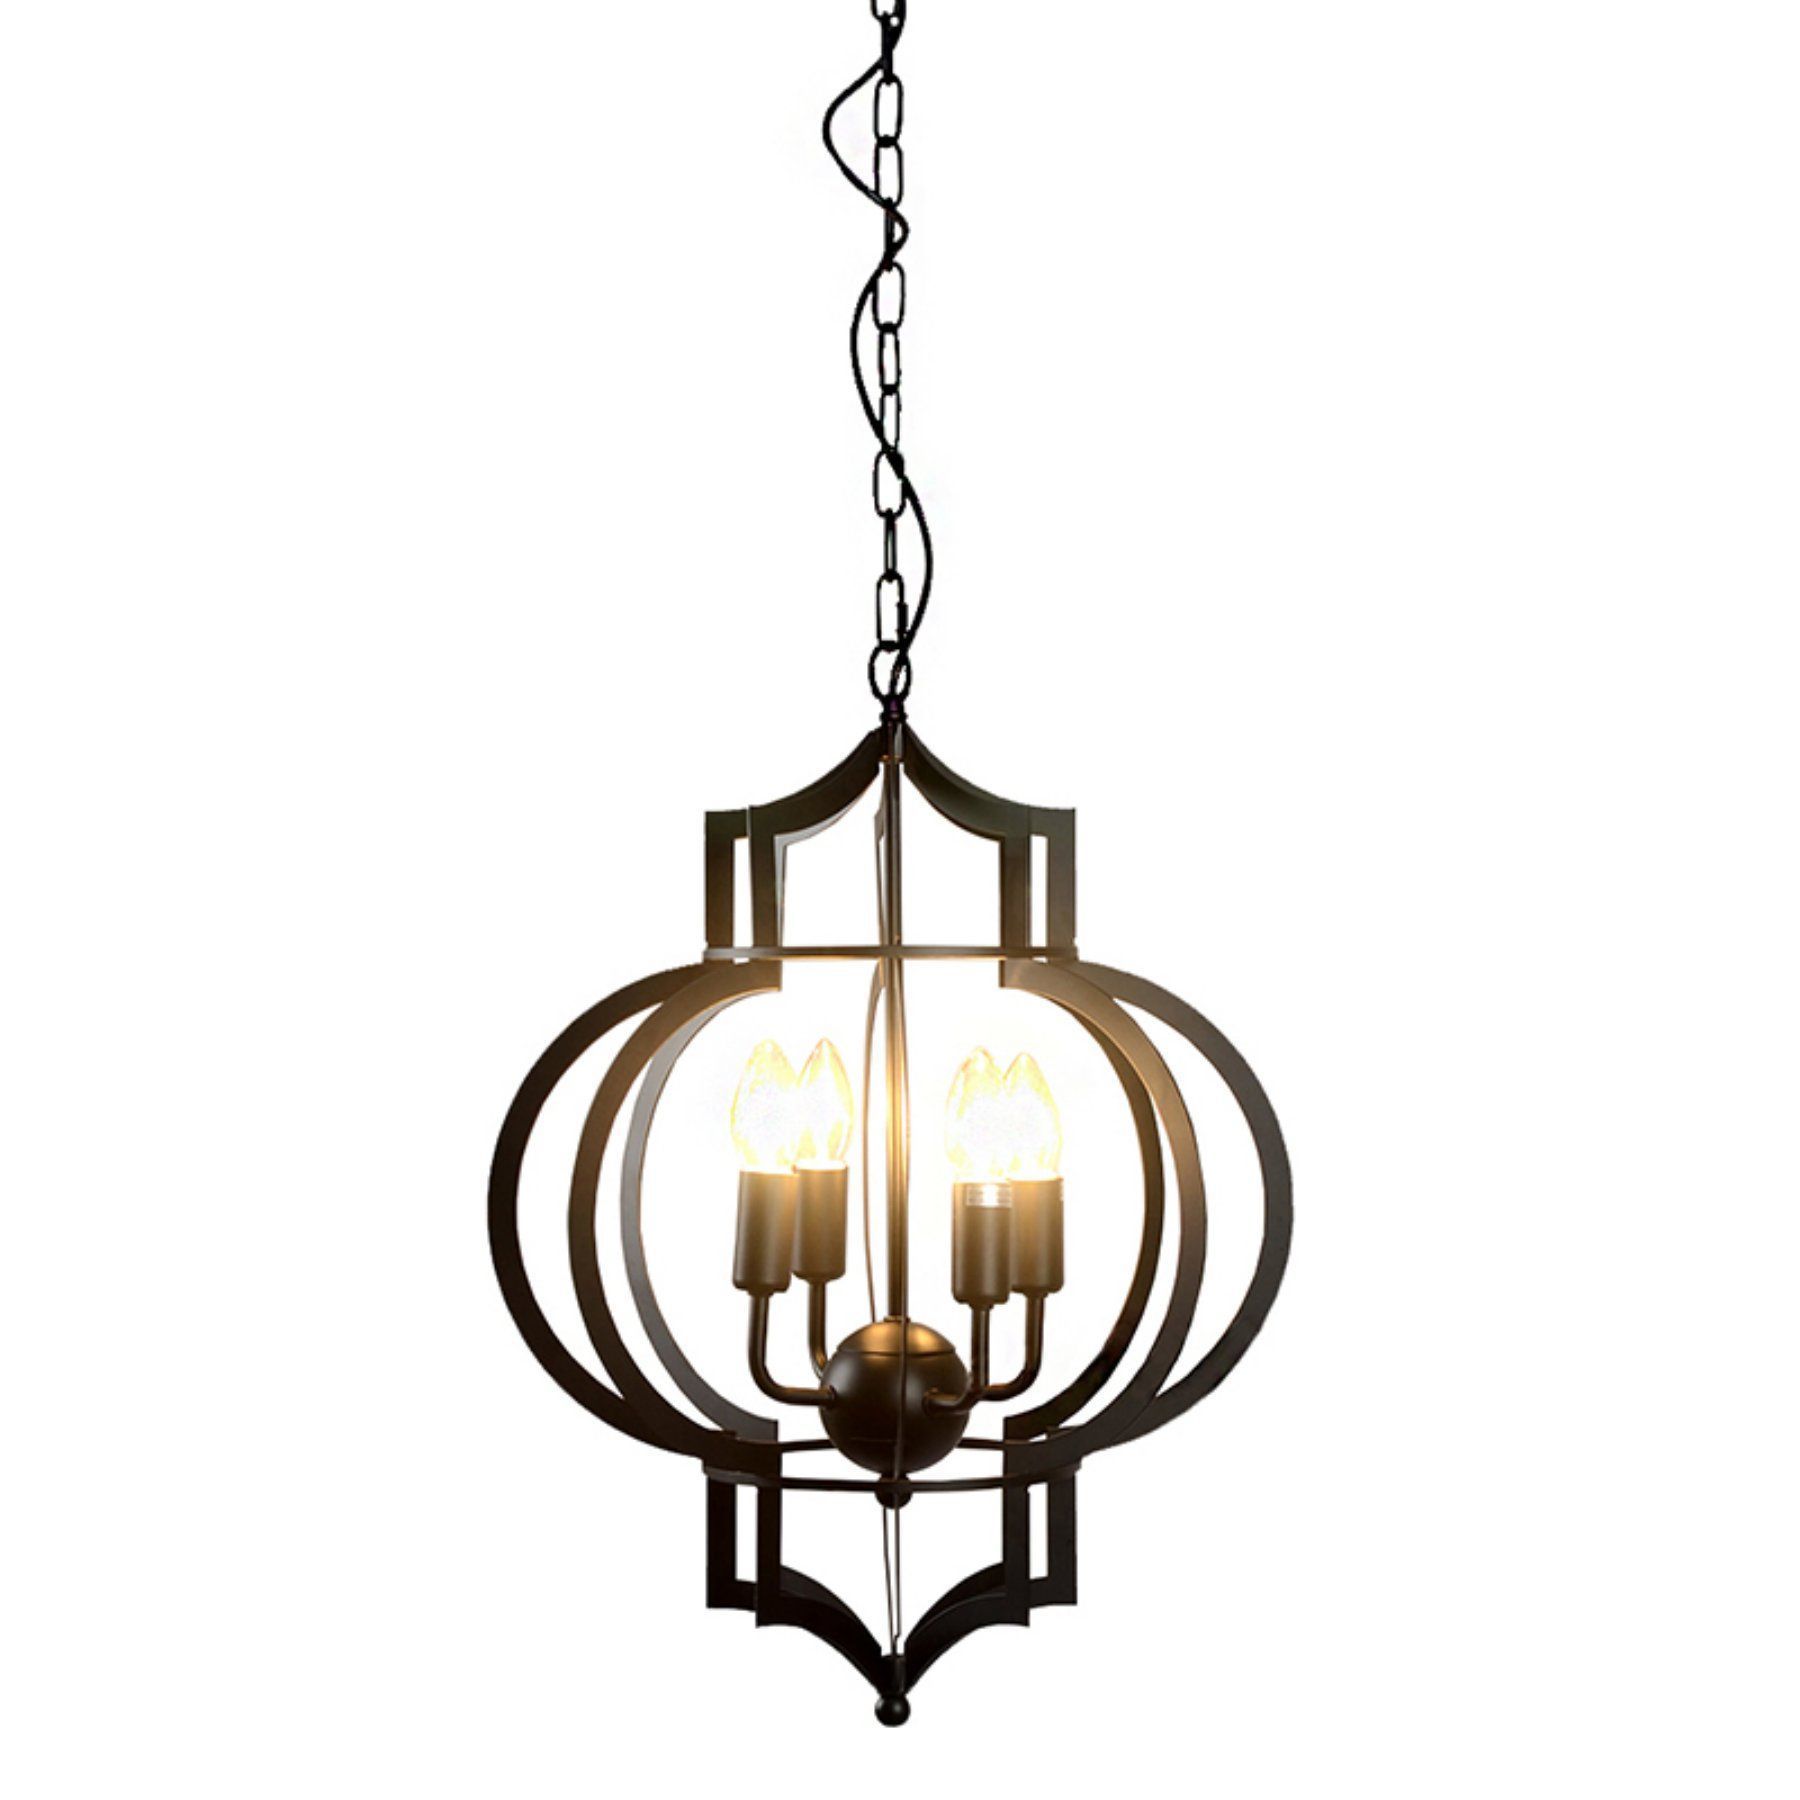 Warehouse Of Tiffany Addison Chandelier – Ld4046 | Products Intended For Lynn 6 Light Geometric Chandeliers (View 11 of 30)